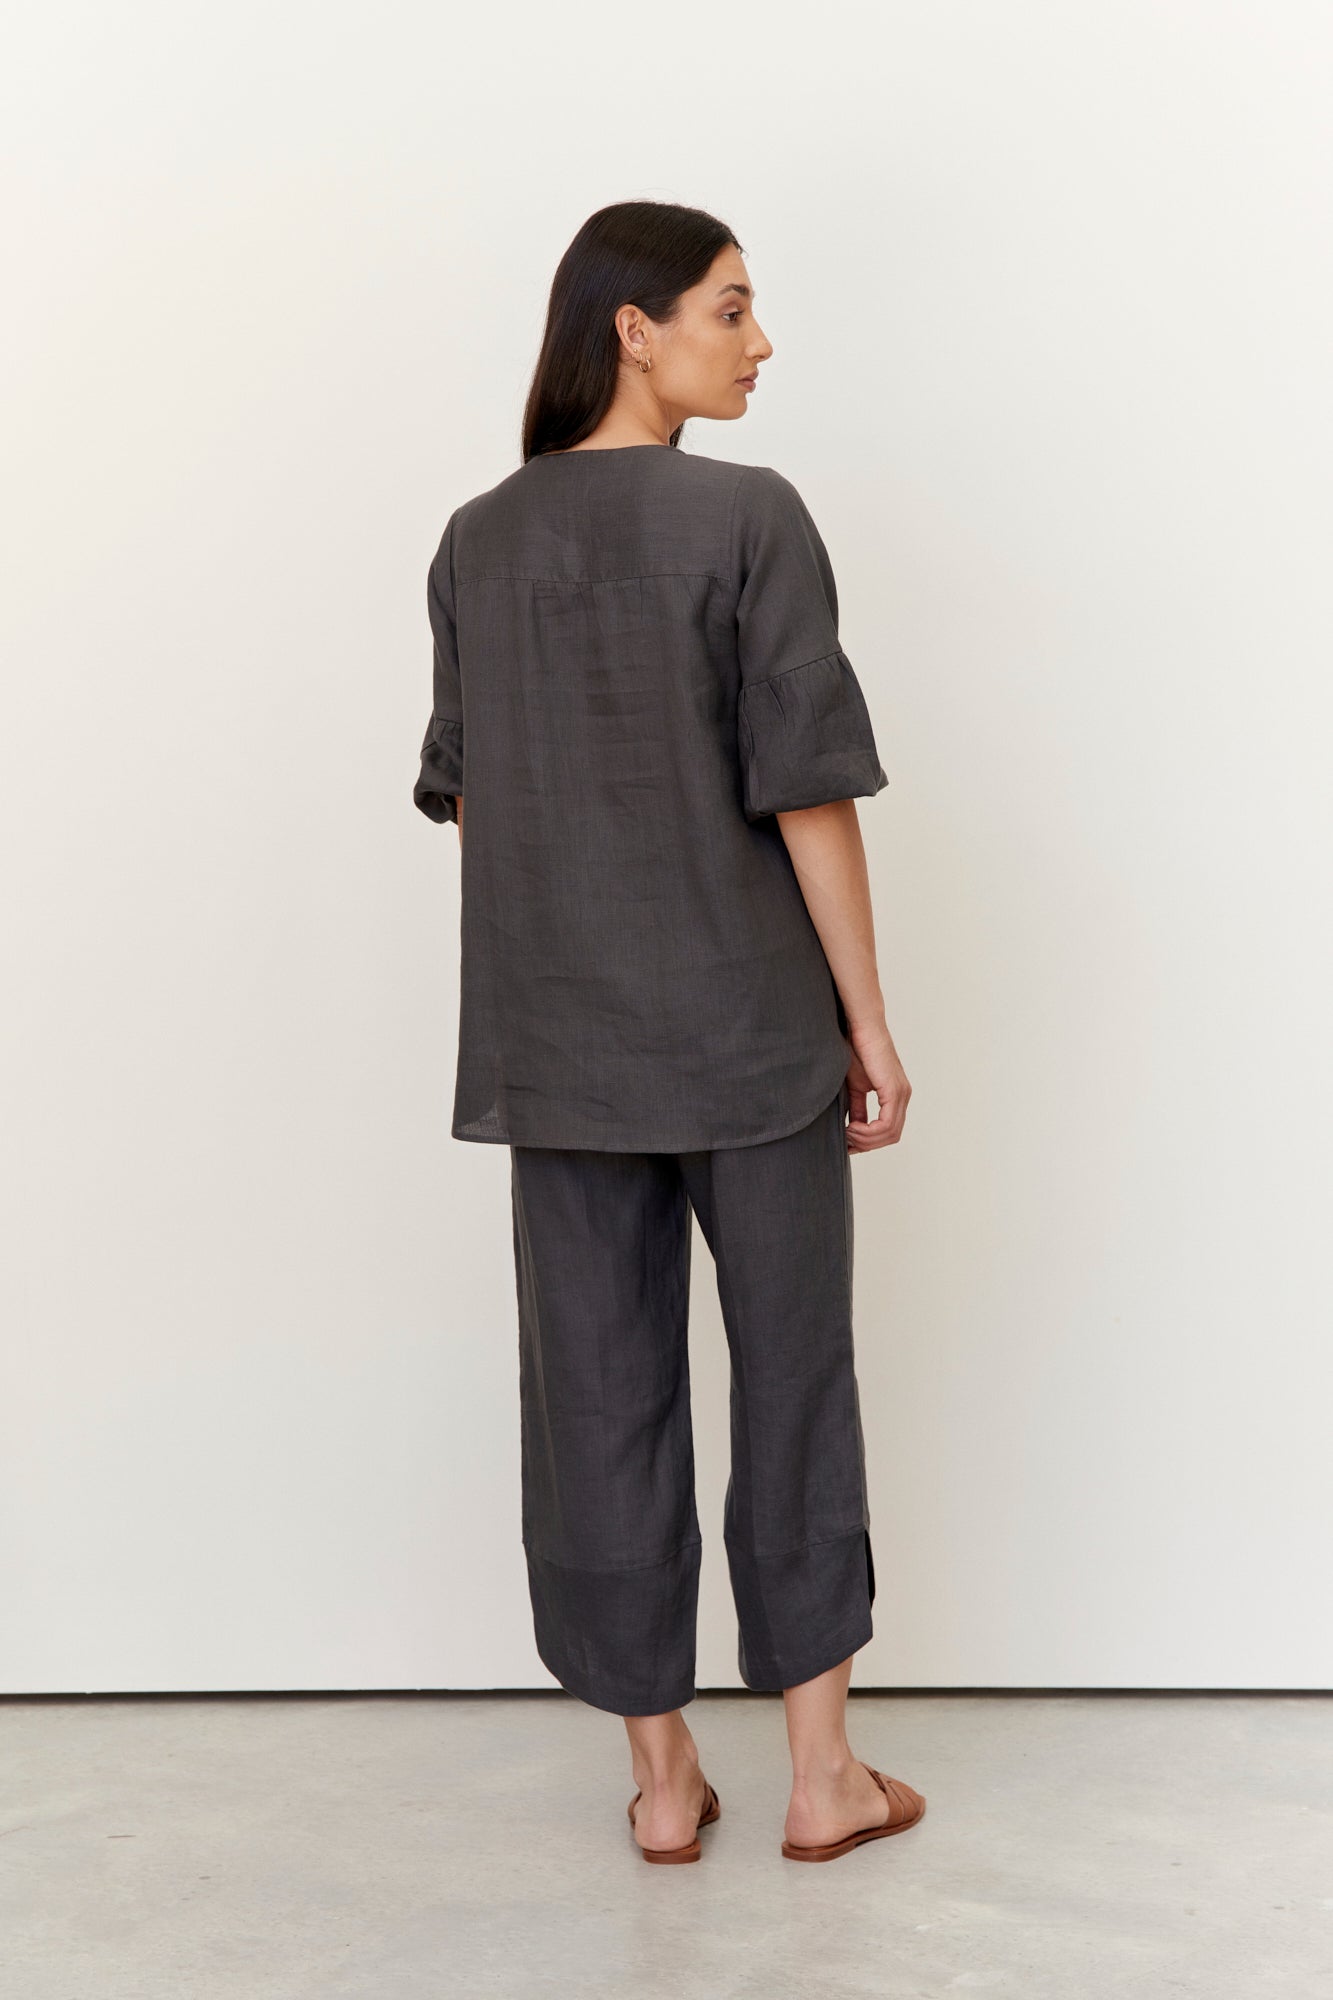 Clancy Top Charcoal